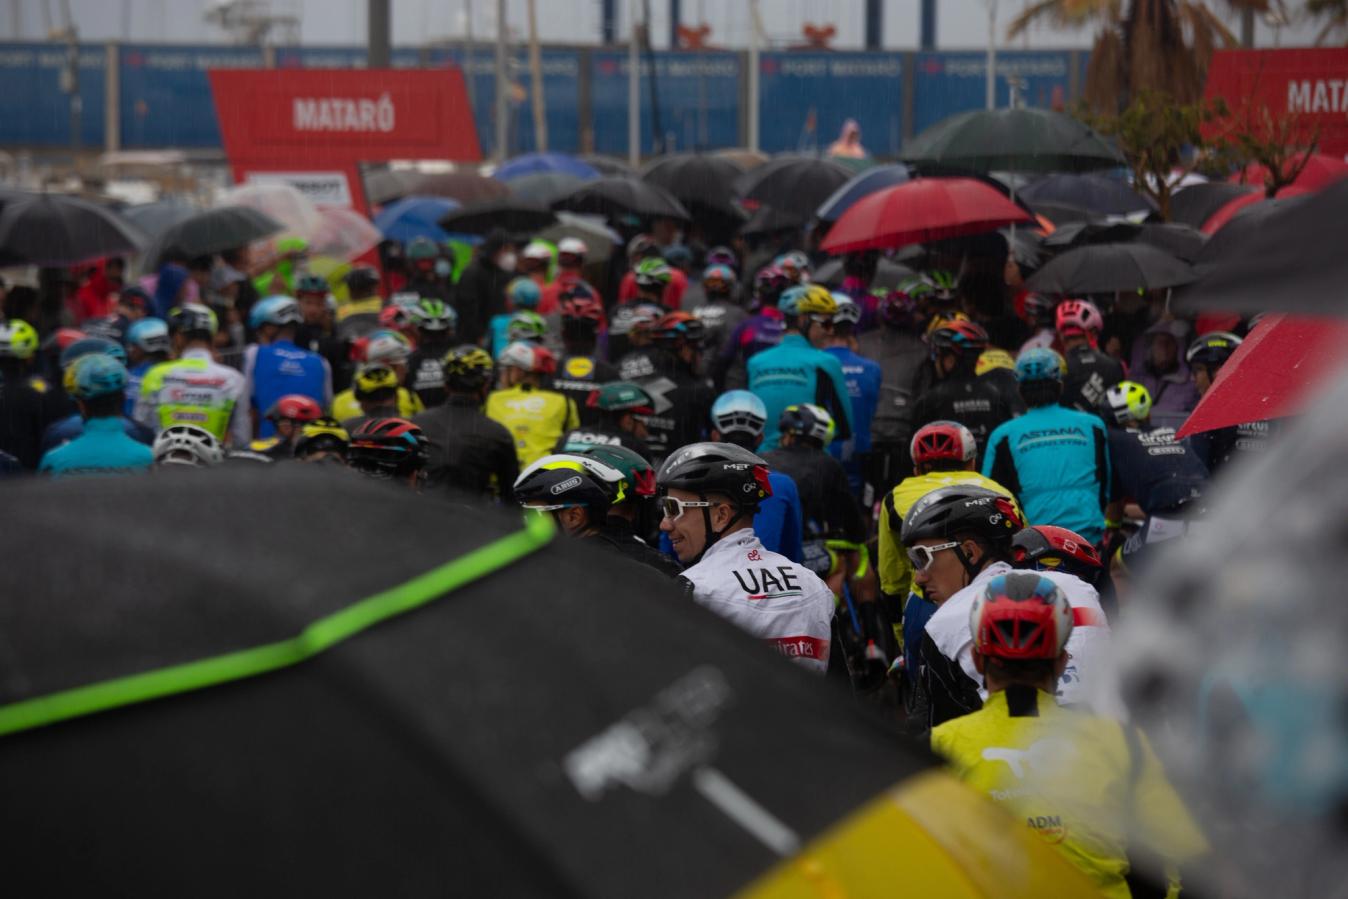 The start line was a sea of umbrellas ahead of stage 2 of the Vuelta a Espana